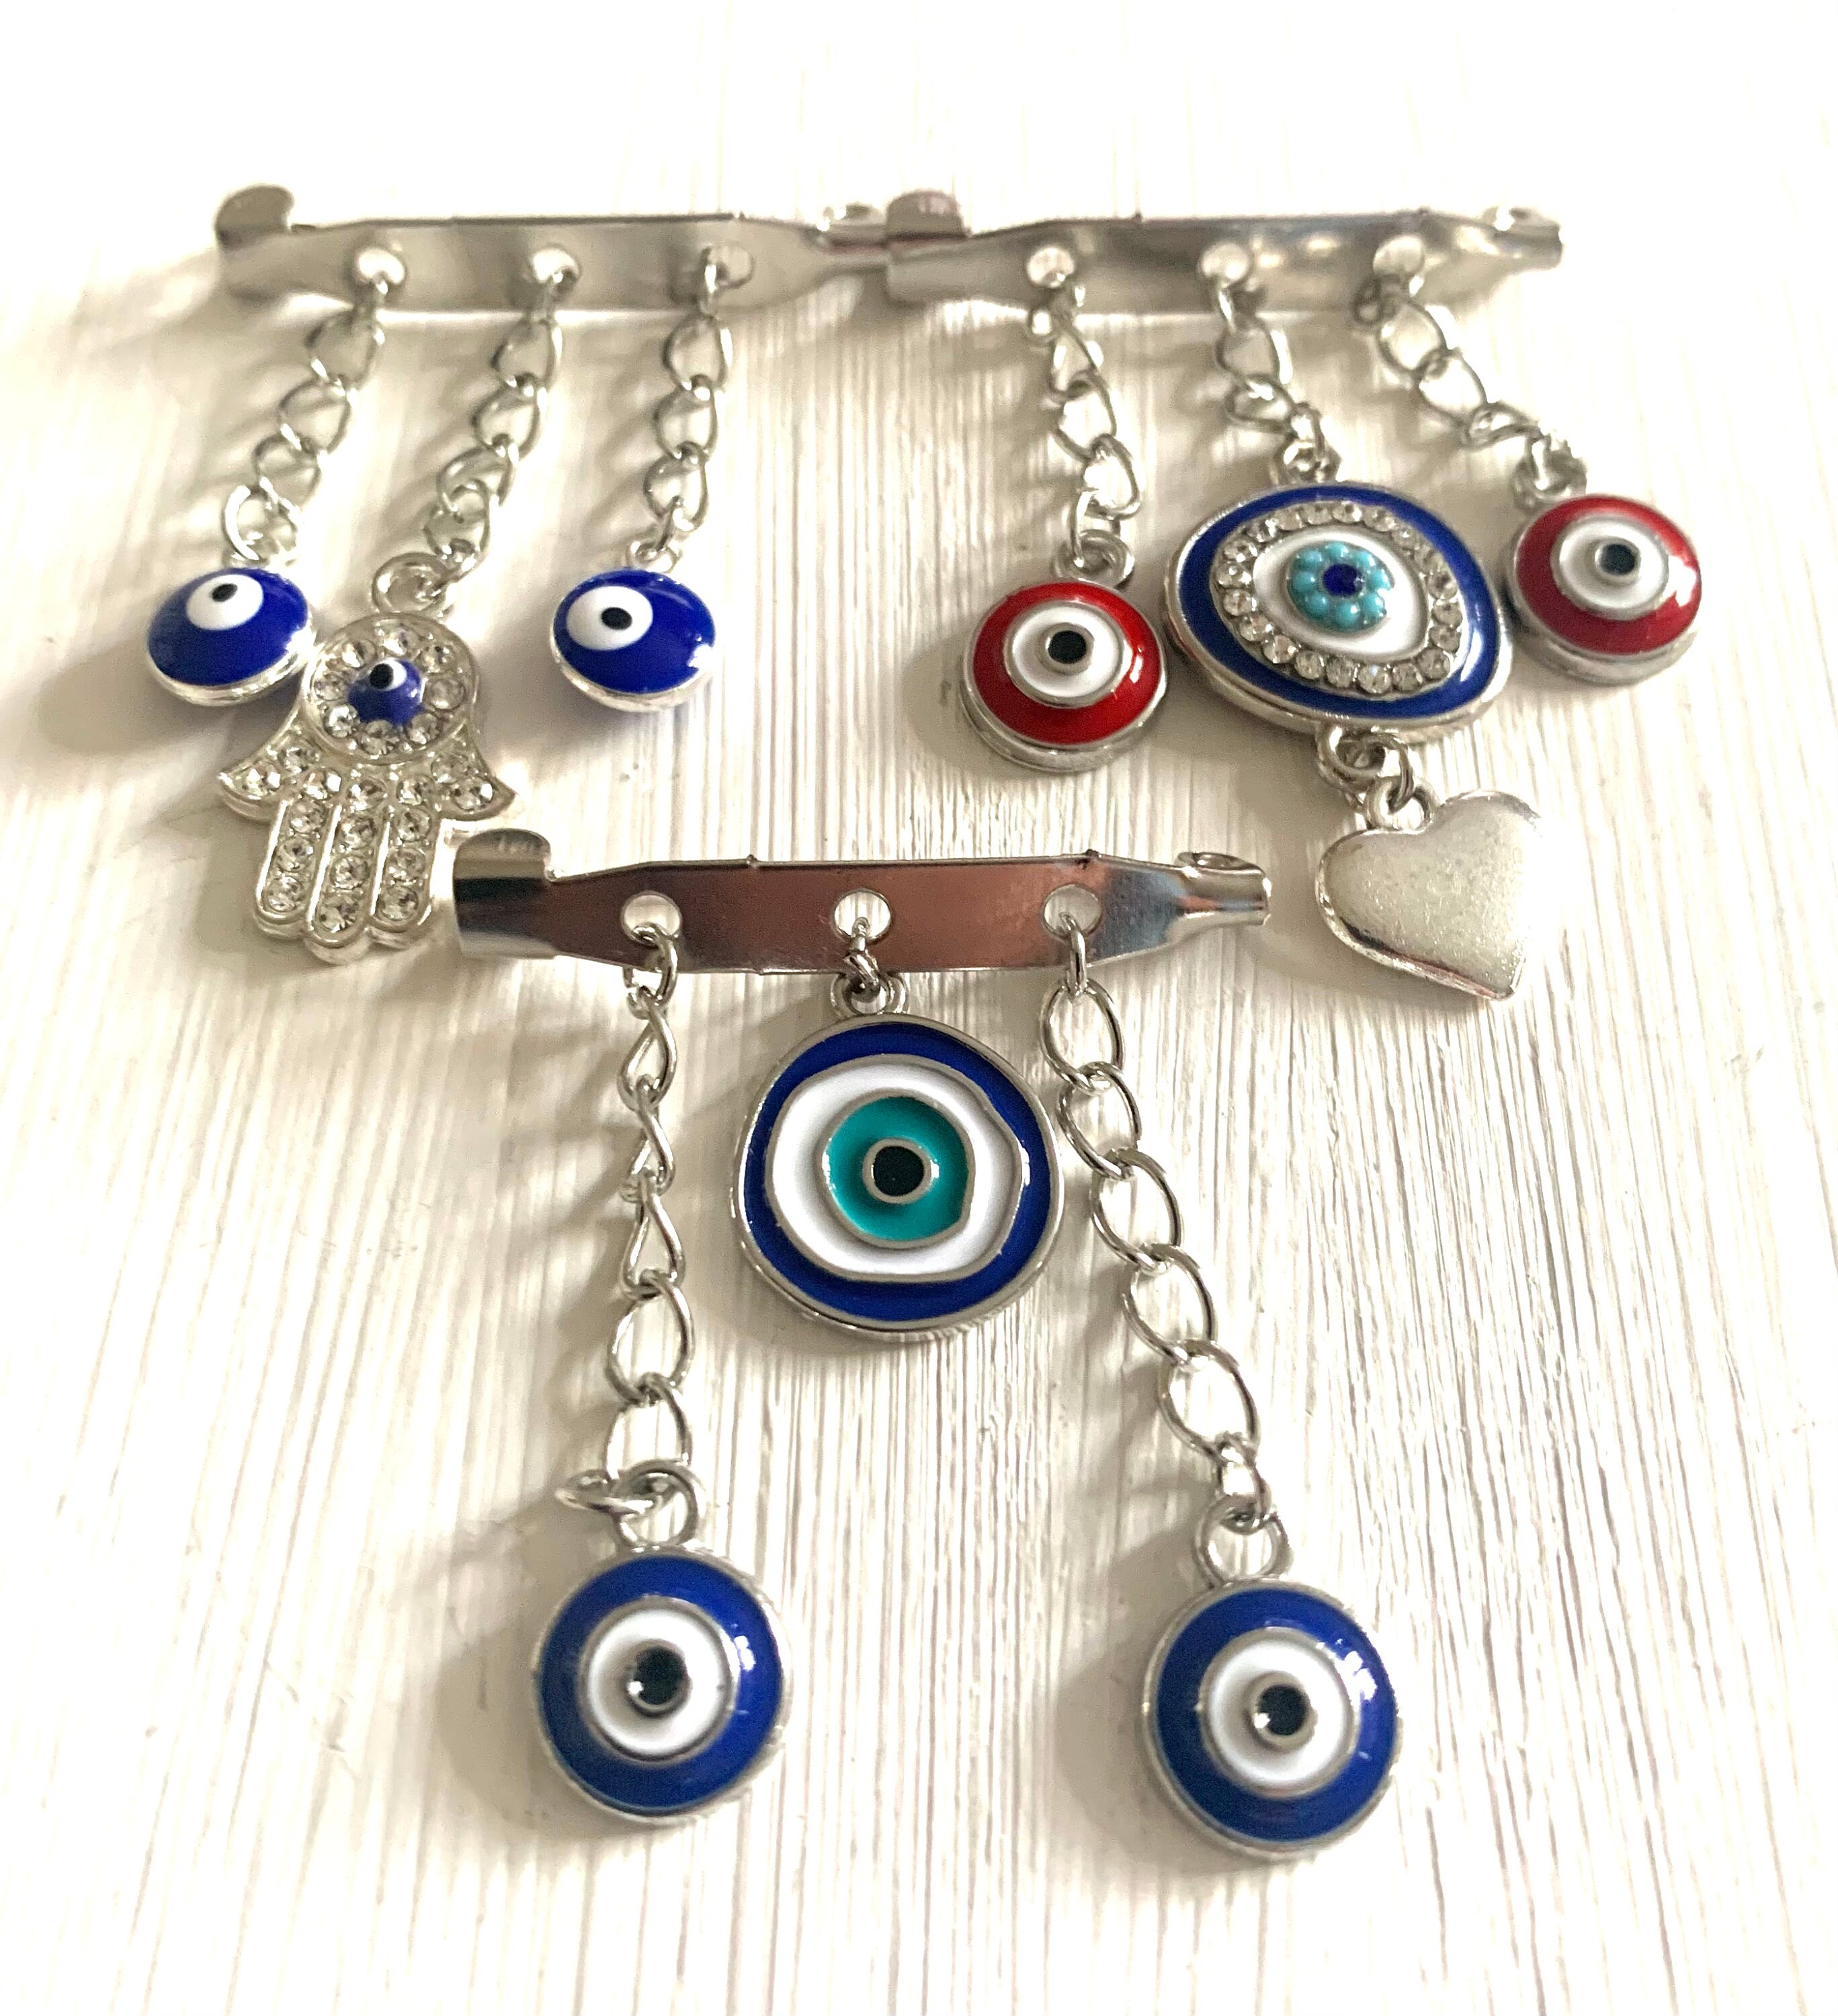 925 Sterling Silver Safety Greek Evil Eye Pin Jewelry. Silver Safety Pin  Brooch.one Hoop for Charms.protection & Good Luck Charm 